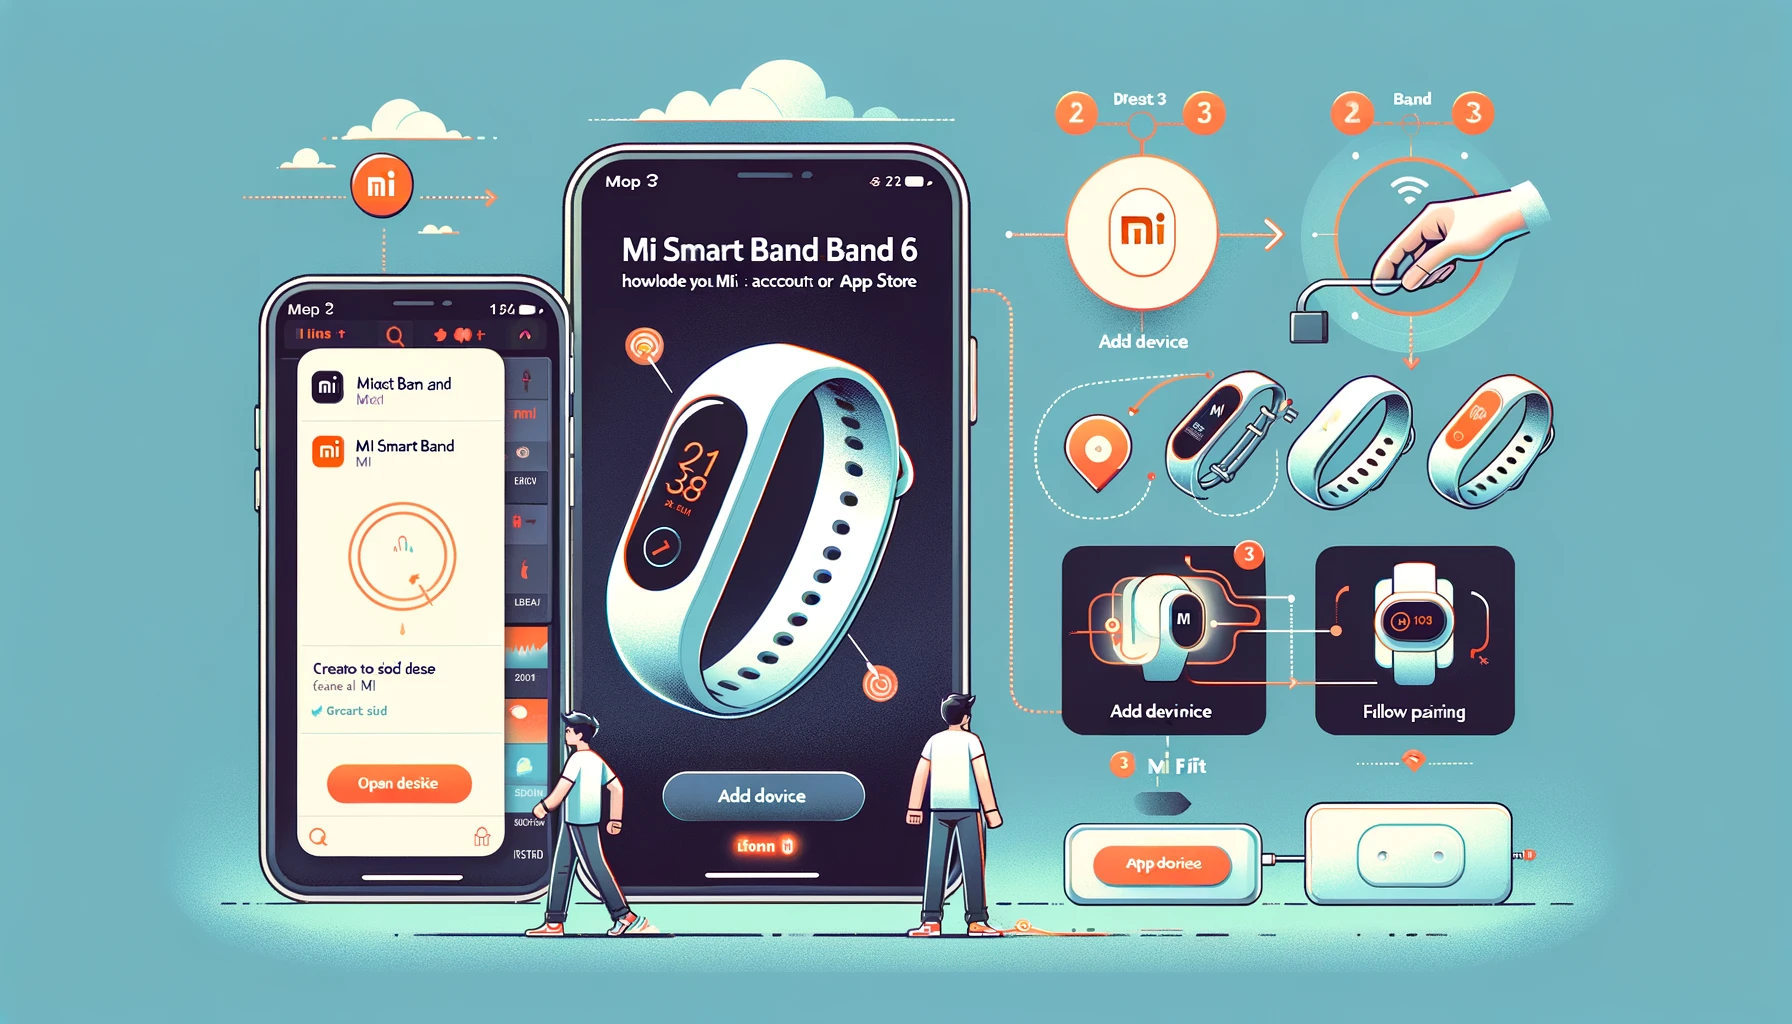 How Does Xiaomi Mi Smart Band 6 Connect to iPhone?